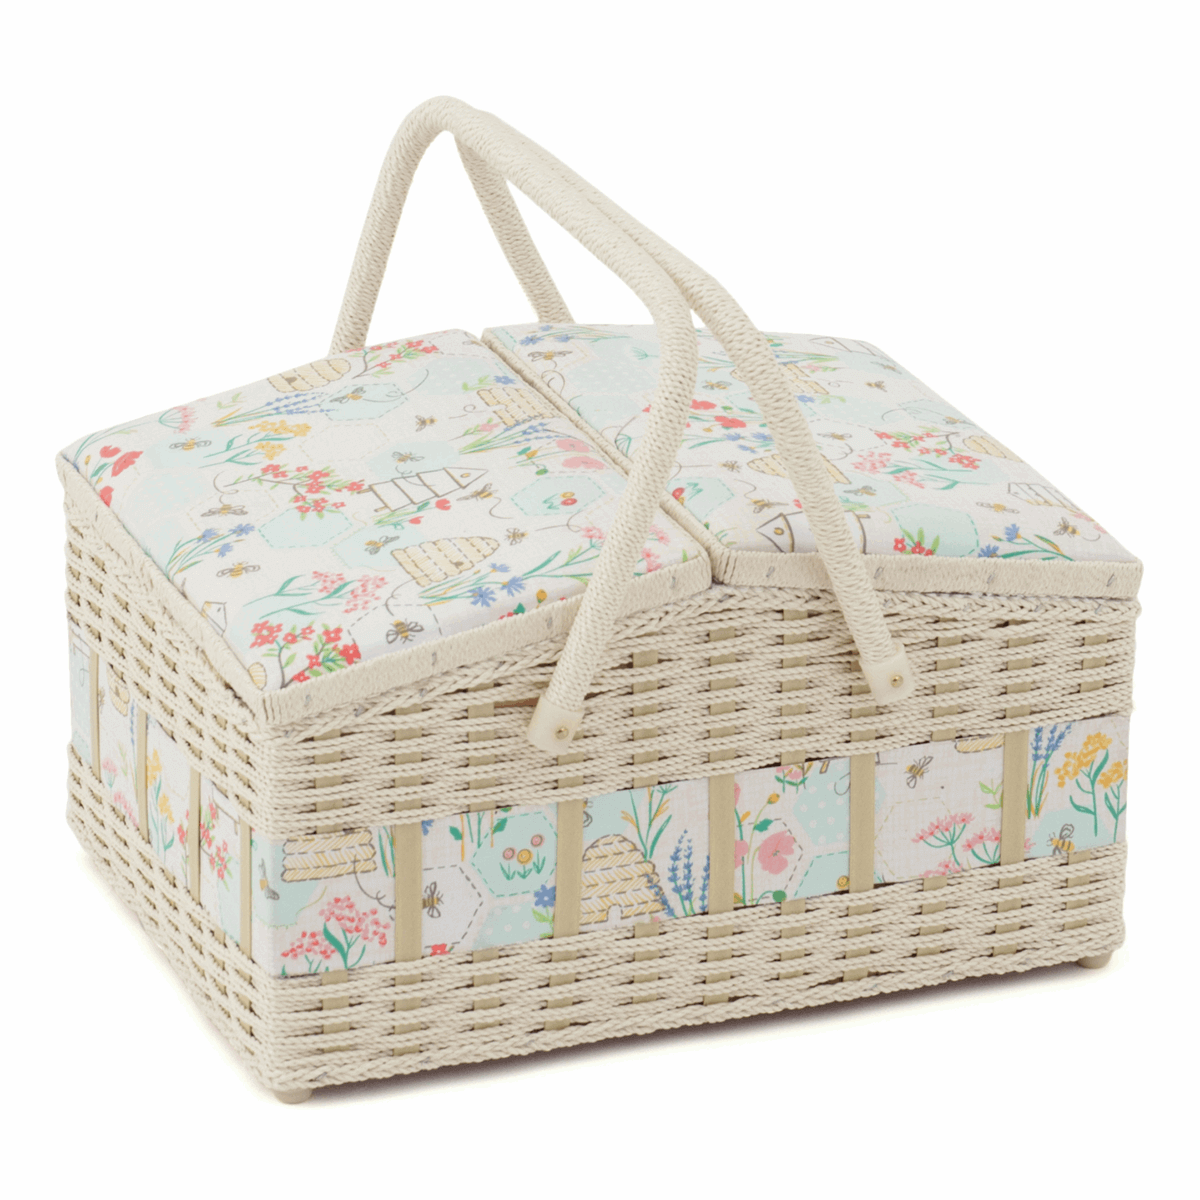 Large Deluxe Sewing Bee Hamper Sewing Box: 26 x 35 x 19cm. Wicker and fabric.